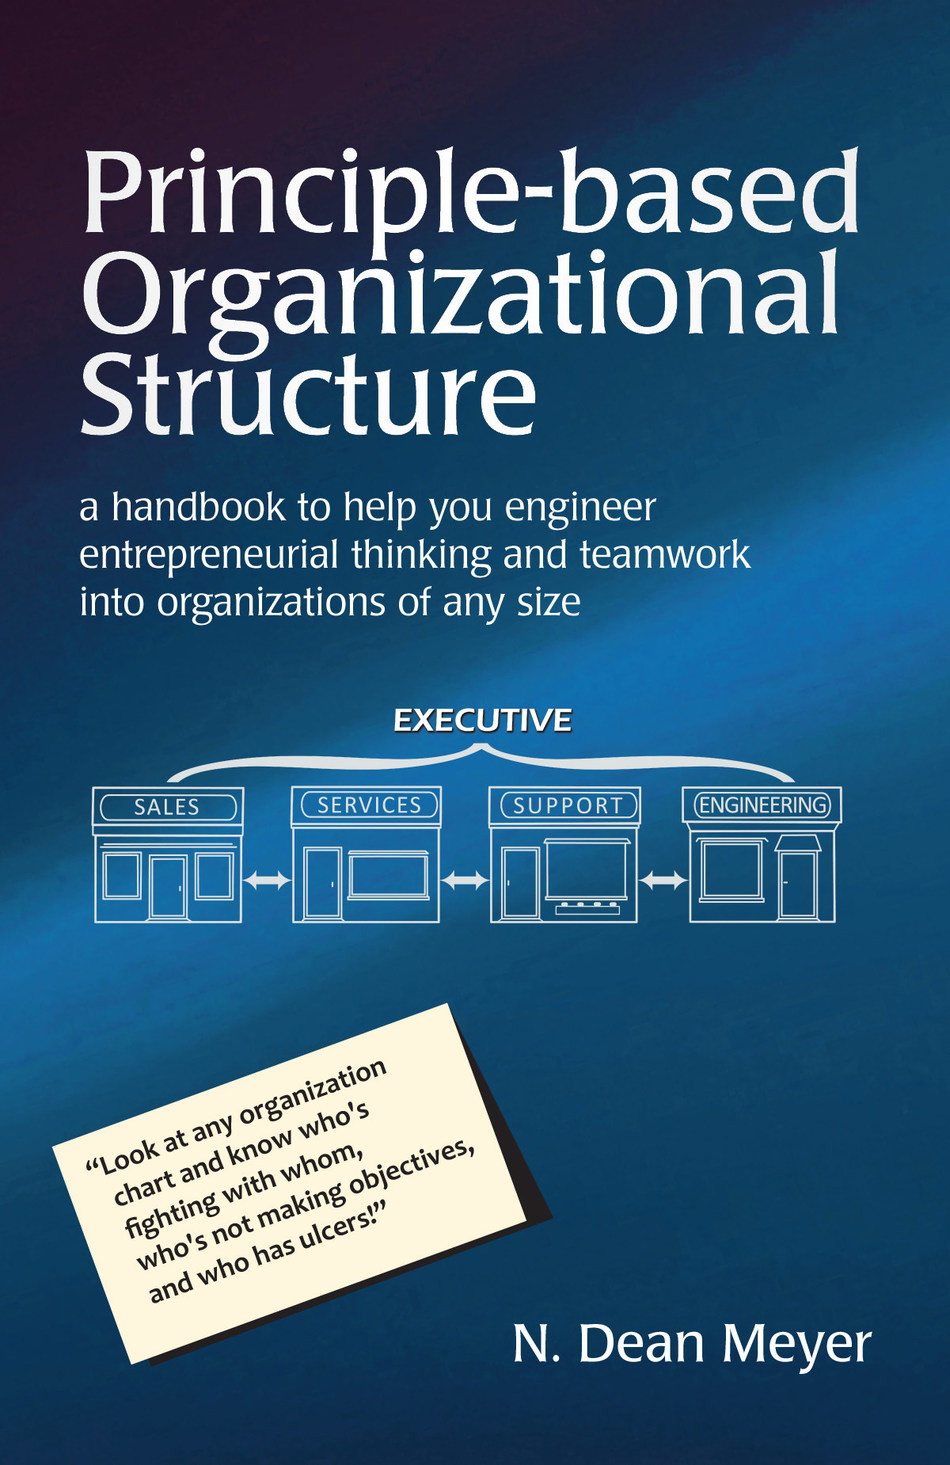 New Business Book on Organizational Structure by Author Dean Meyer